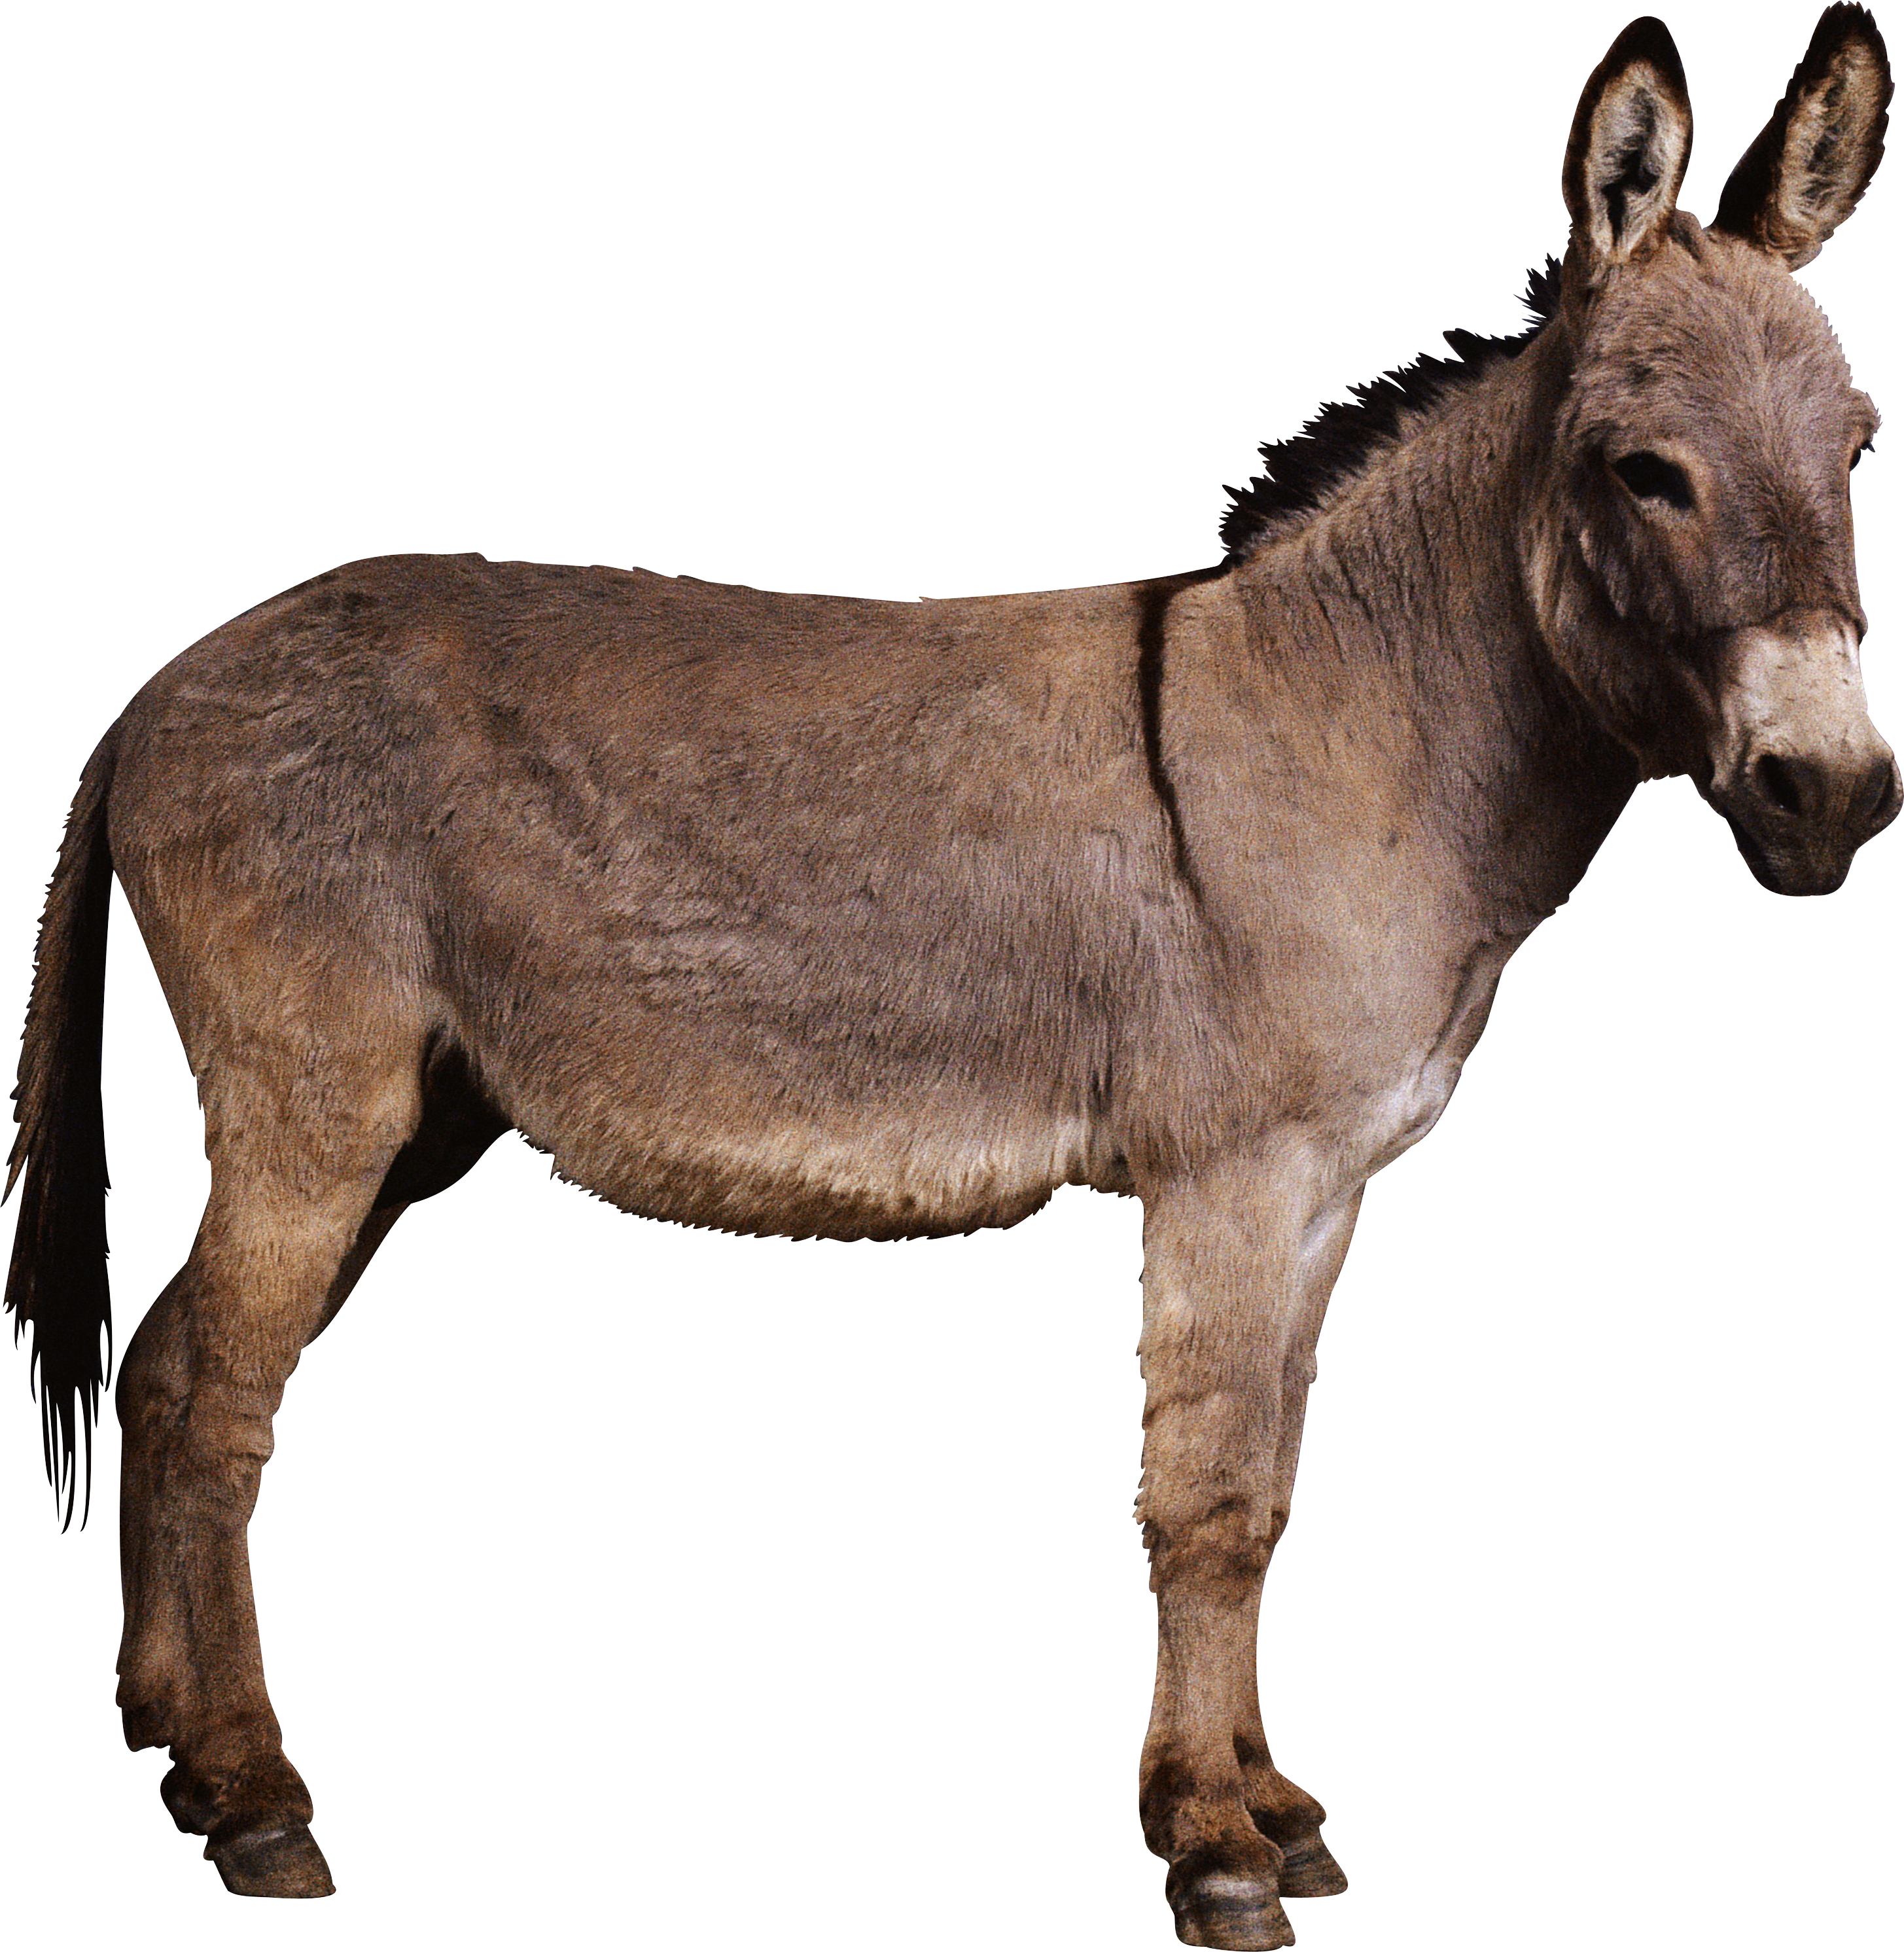 Mule Clipart Shrek Character - Donkey From Shrek Png - Free Transparent PNG  Clipart Images Download